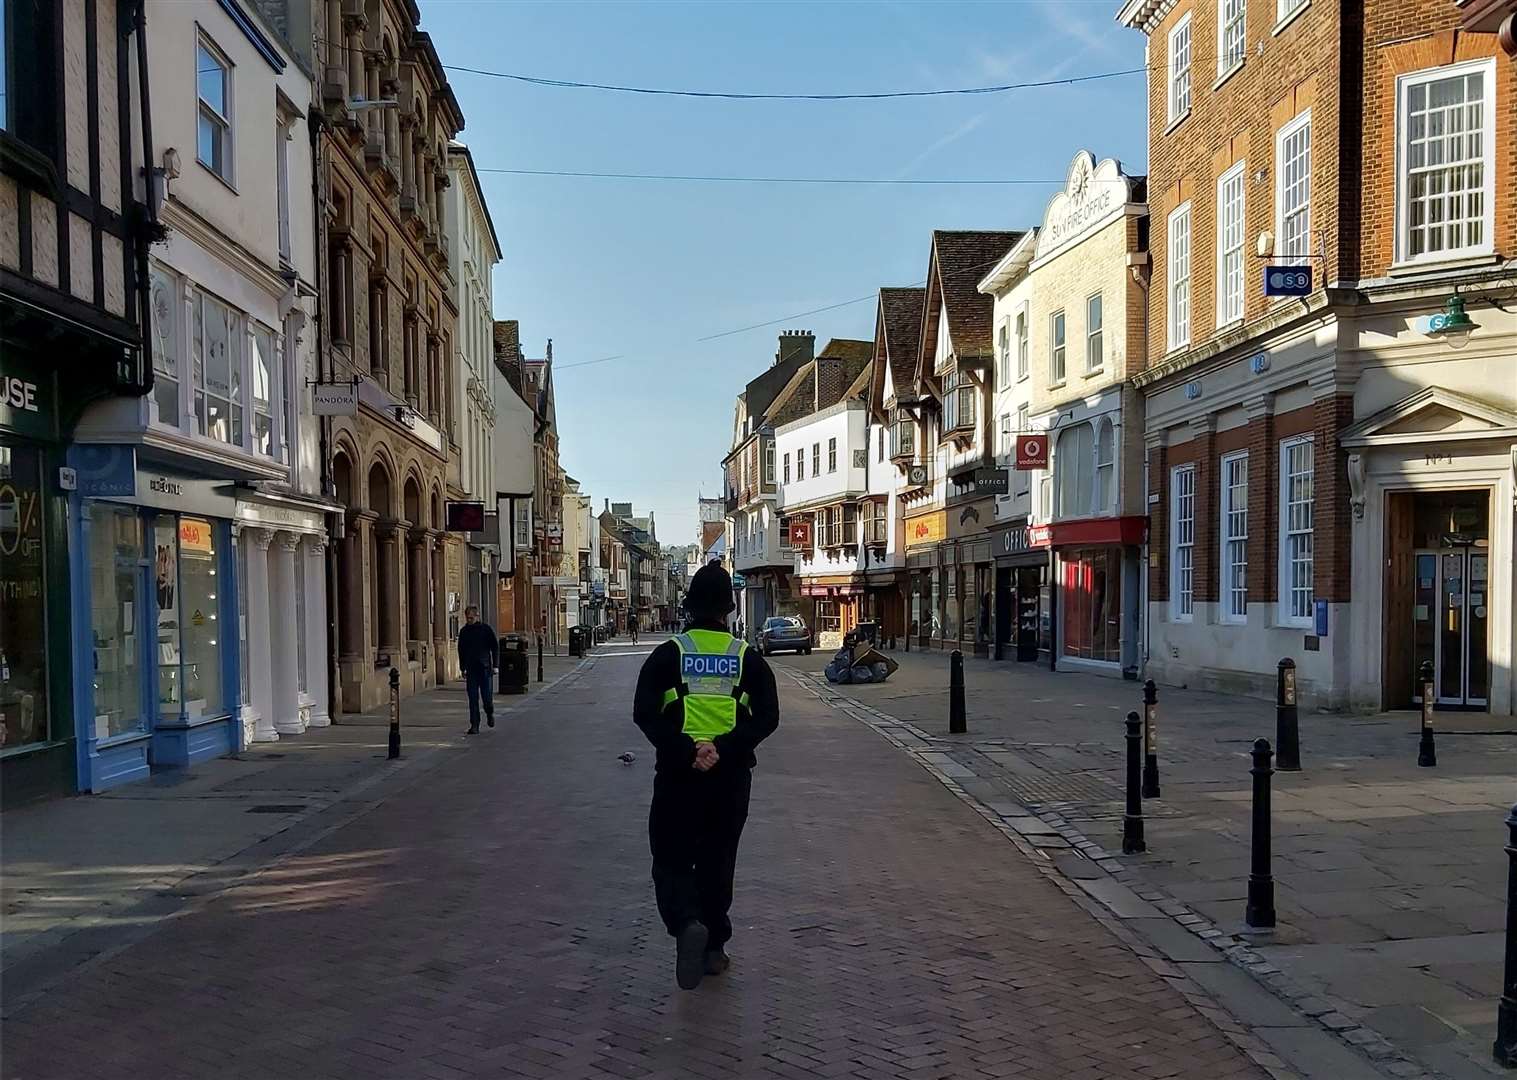 People in Canterbury diligently observed the social distancing rules on Tuesday. Picture: Police in Canterbury / Twitter